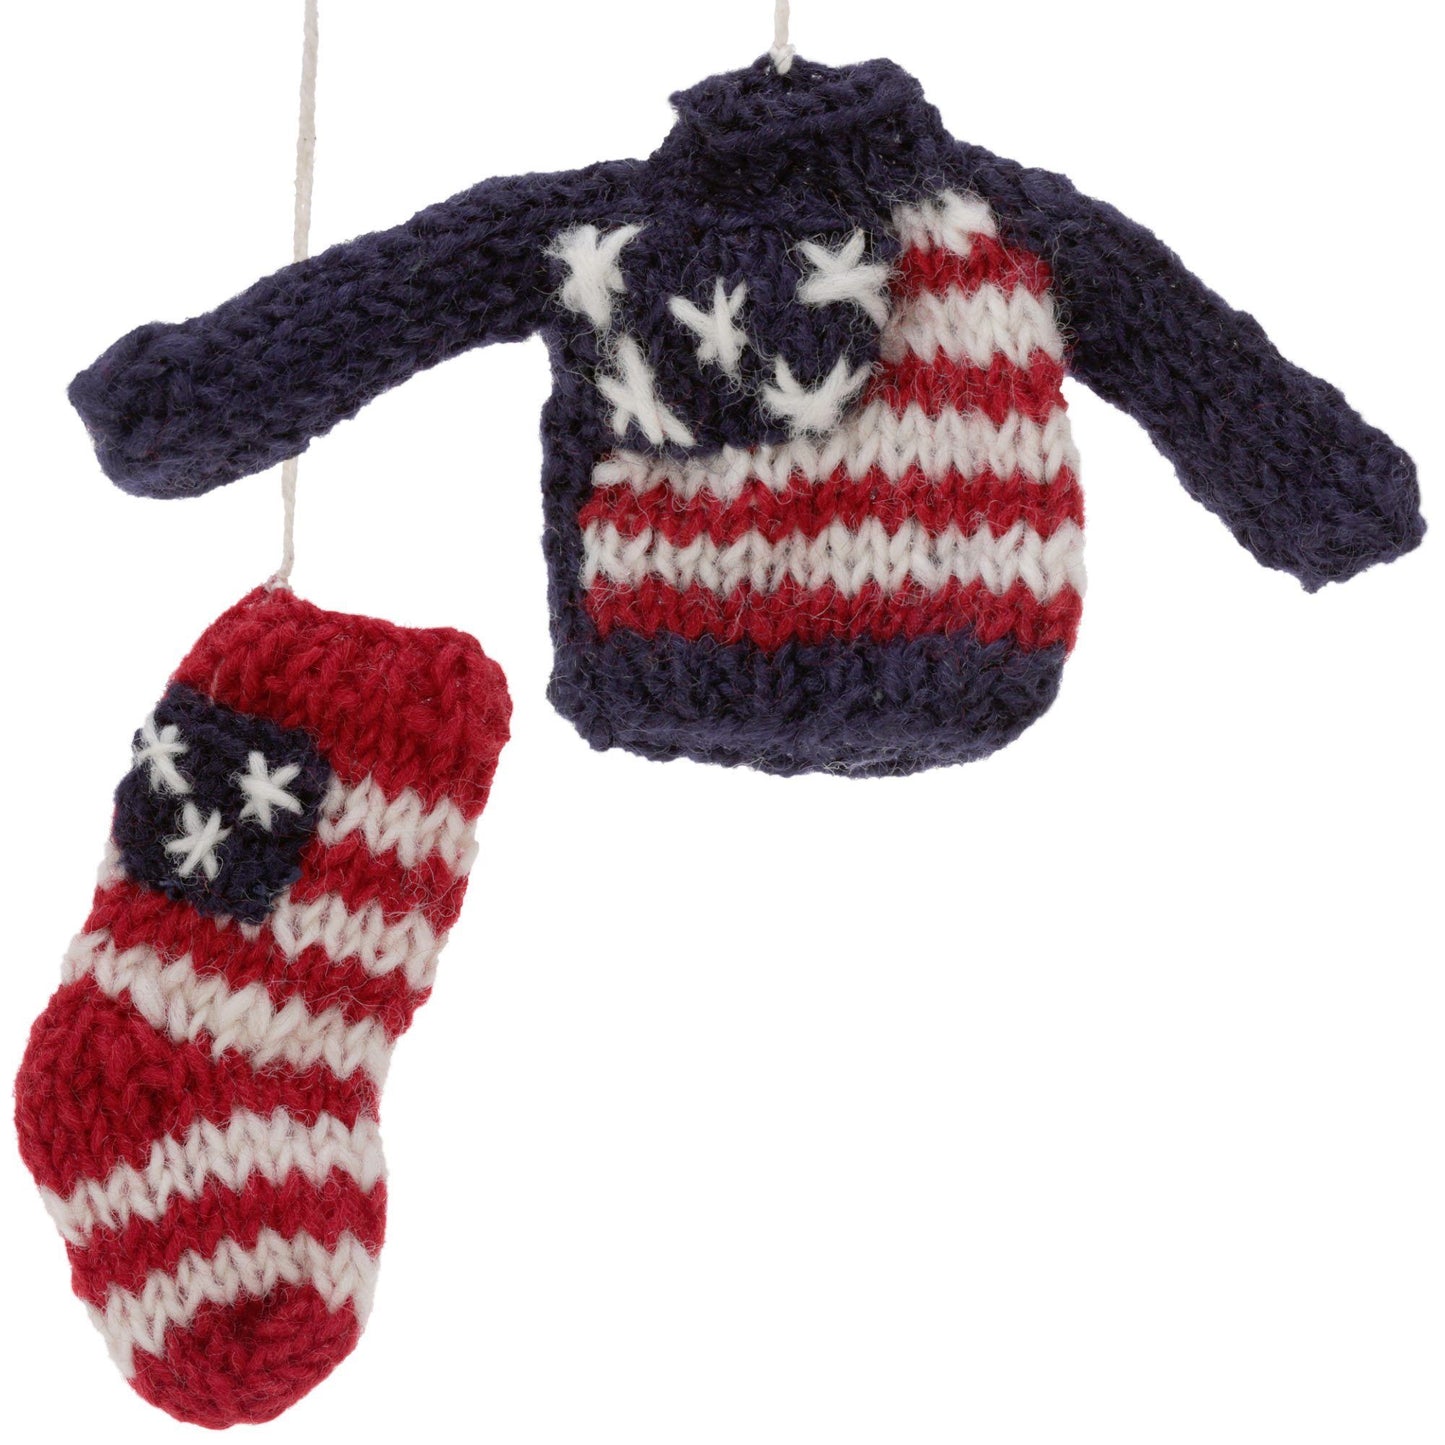 Old Glory Sweater & Stocking Ornaments - Set of 2!